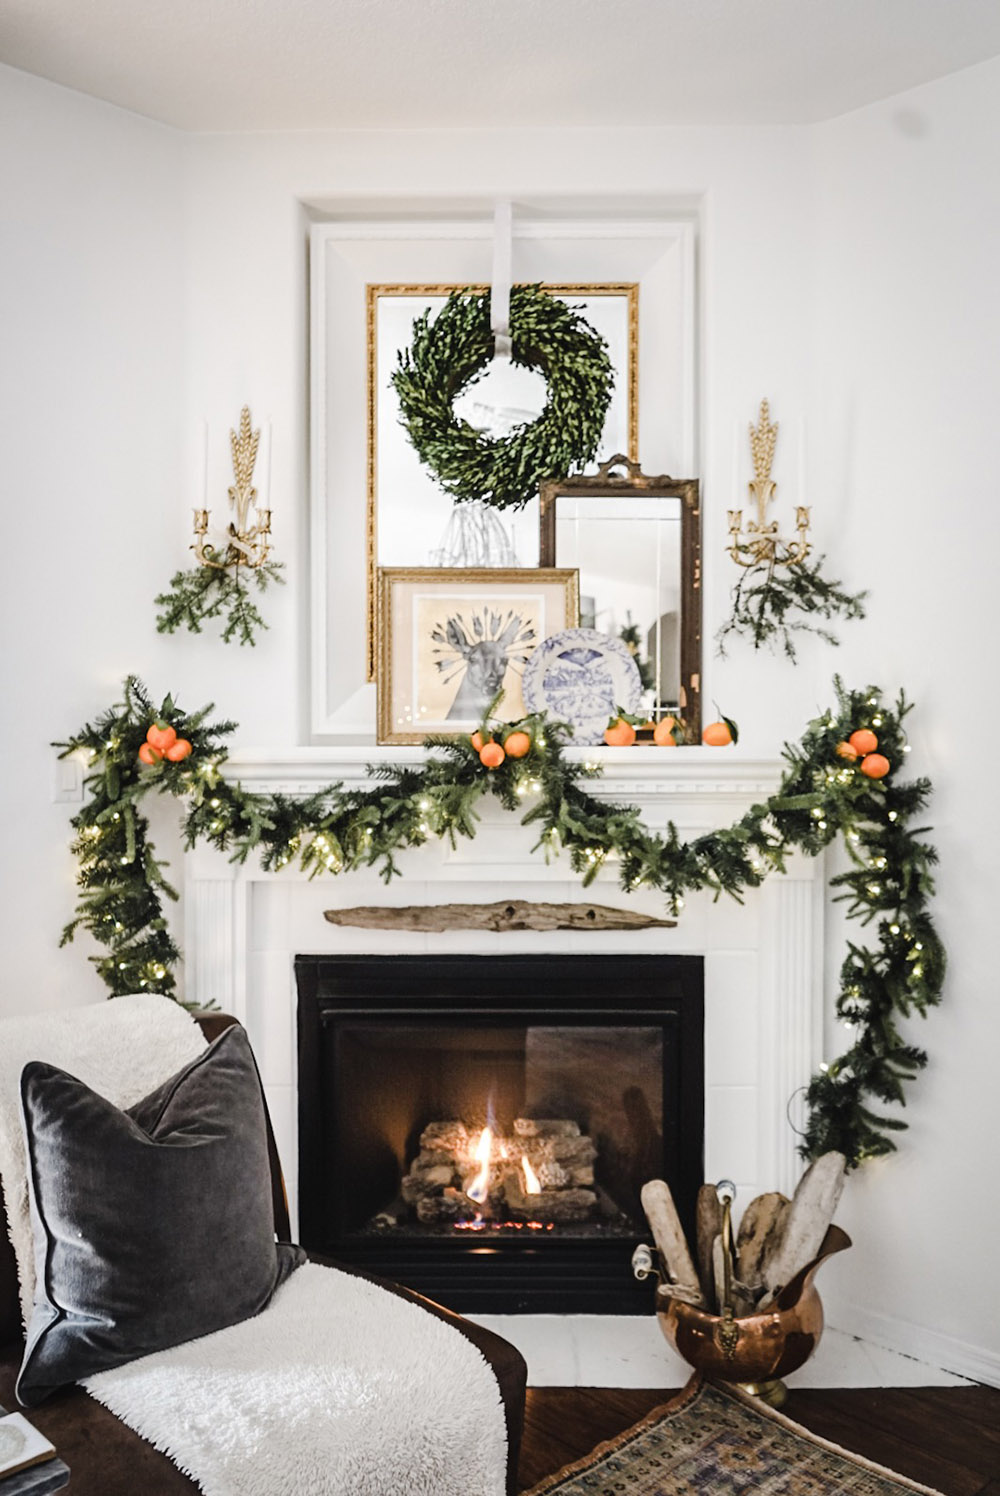 A wreath and garland hang above a burning fireplace.